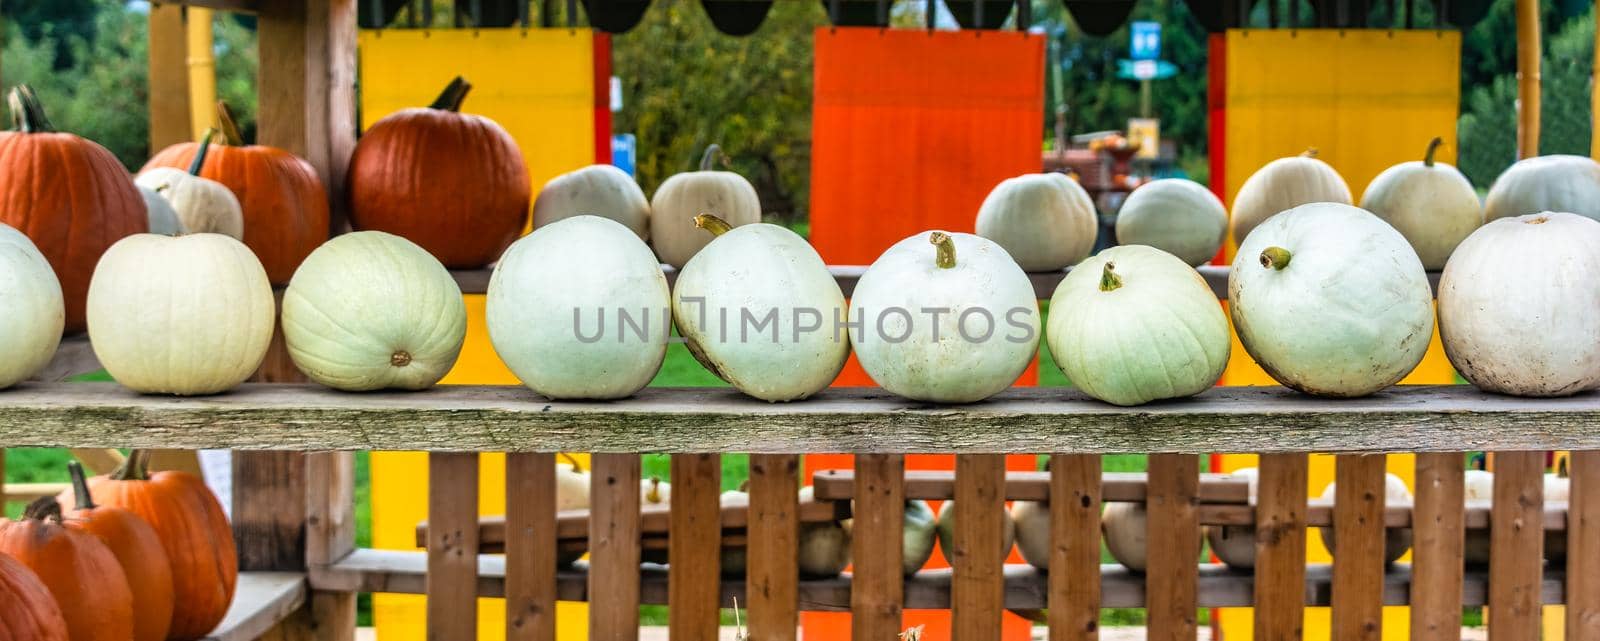 Decorative ripe pumpkins stored on wooden shelves by Imagenet